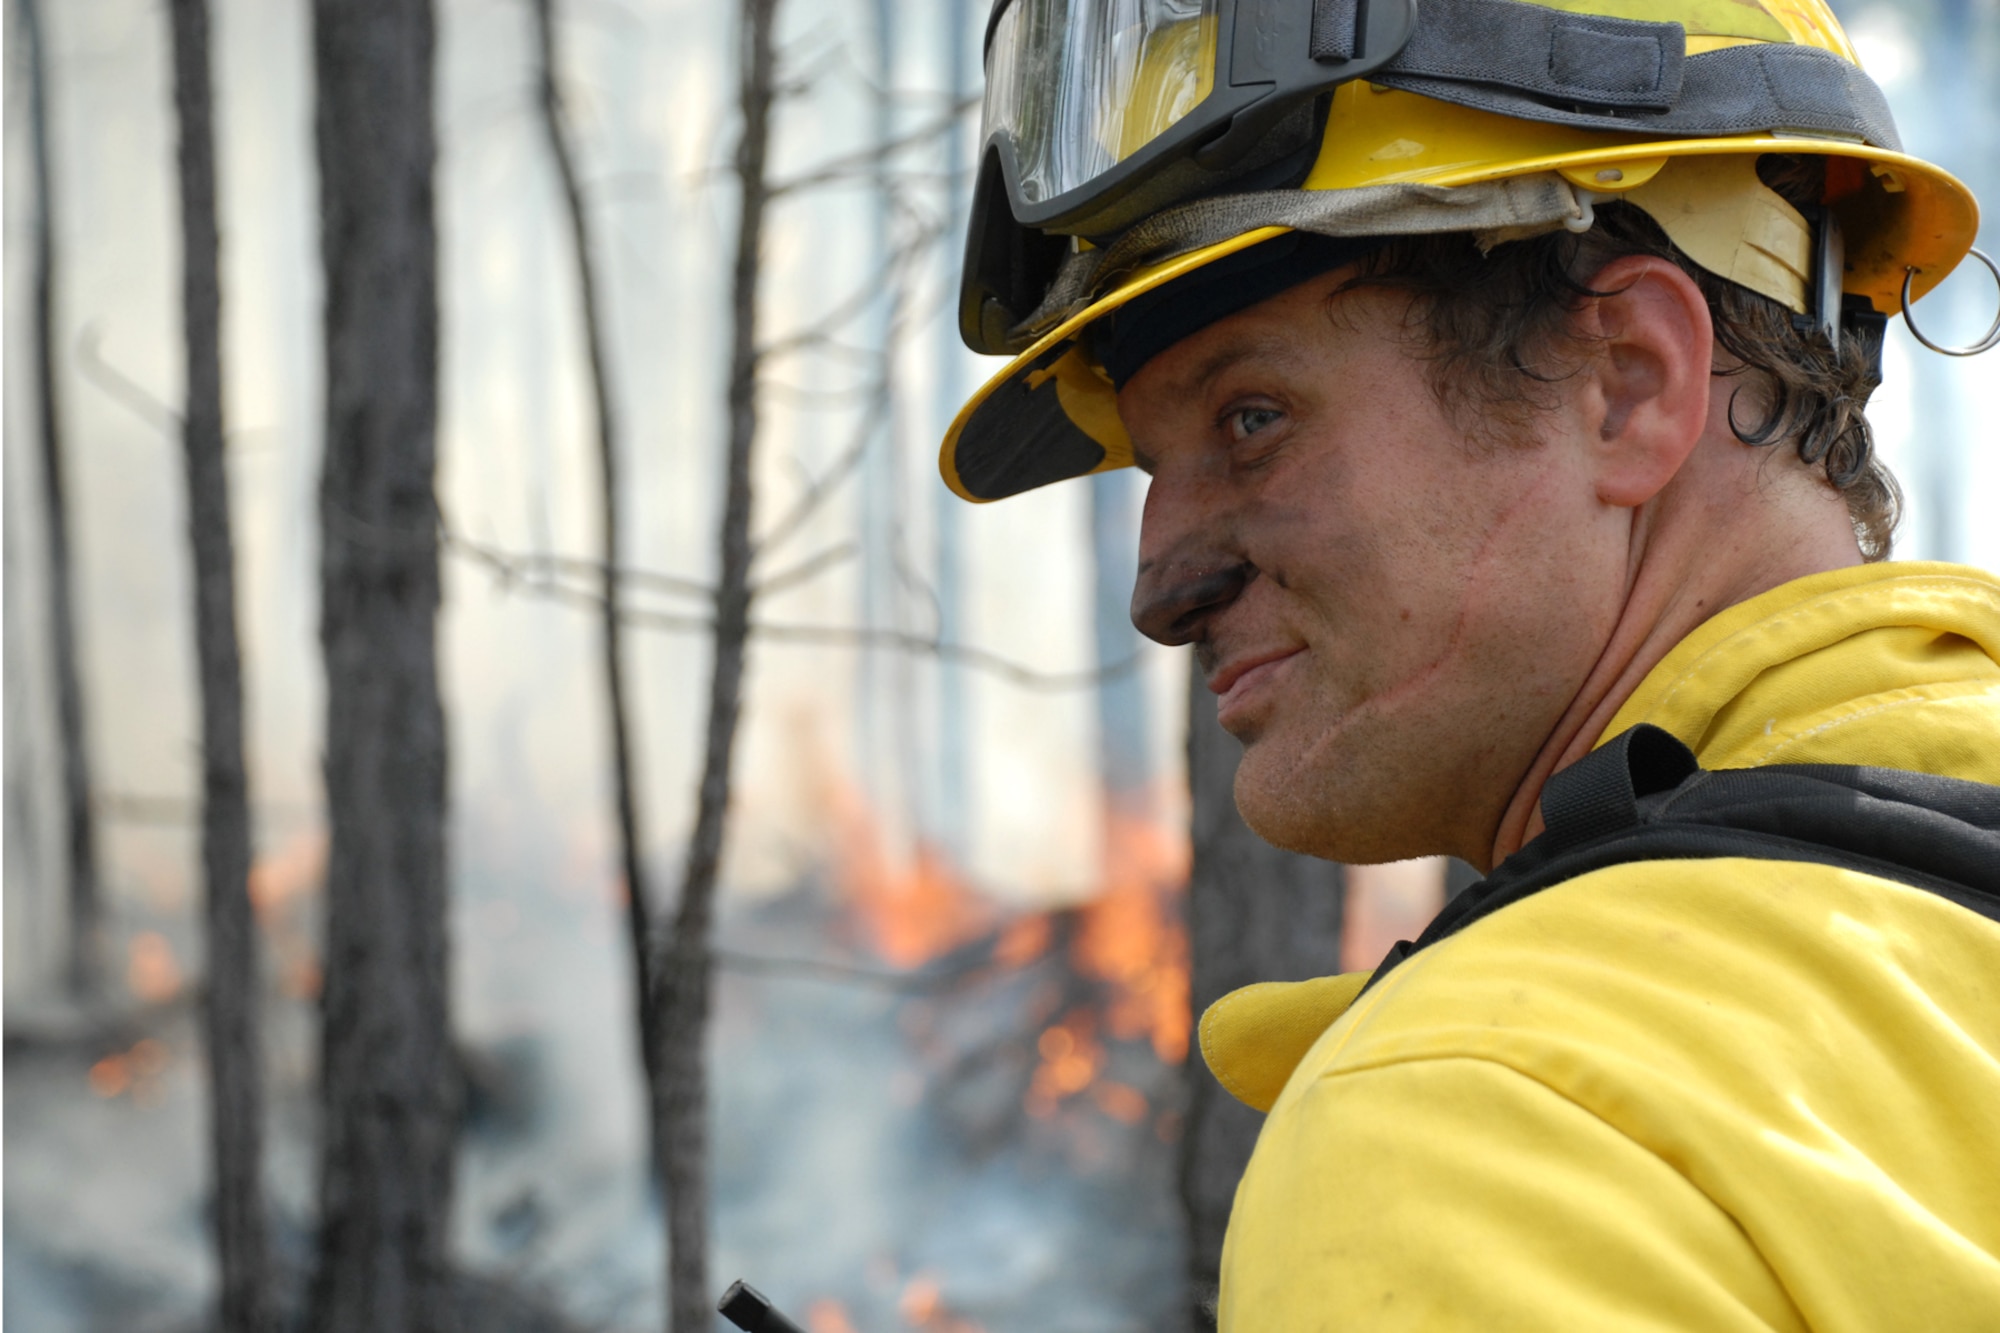 EGLIN AIR FORCE BASE, Fla. -- Hollister Hurt, a Jackson Guard forestry technician and wildland fire specialist, monitors the progress of a fire set for a prescribed burn at White Point, an 85-acre recreation area on the Choctawhatchee Bay Jan. 29. Many native plants and animal species depend on Eglin's fire-dependent long-leaf pine ecosystem, 11 of which are federally protected. Endangered species such as the red-cockaded woodpecker, depend on fire that is typically caused by either lightning strikes or Eglin's resident fire managers to survive. As of the 2008 control burn season, Jackson Guard's five-year average is 73,000 acres burned annually. (U.S. Air Force Photo by Staff Sgt. Mike Meares)